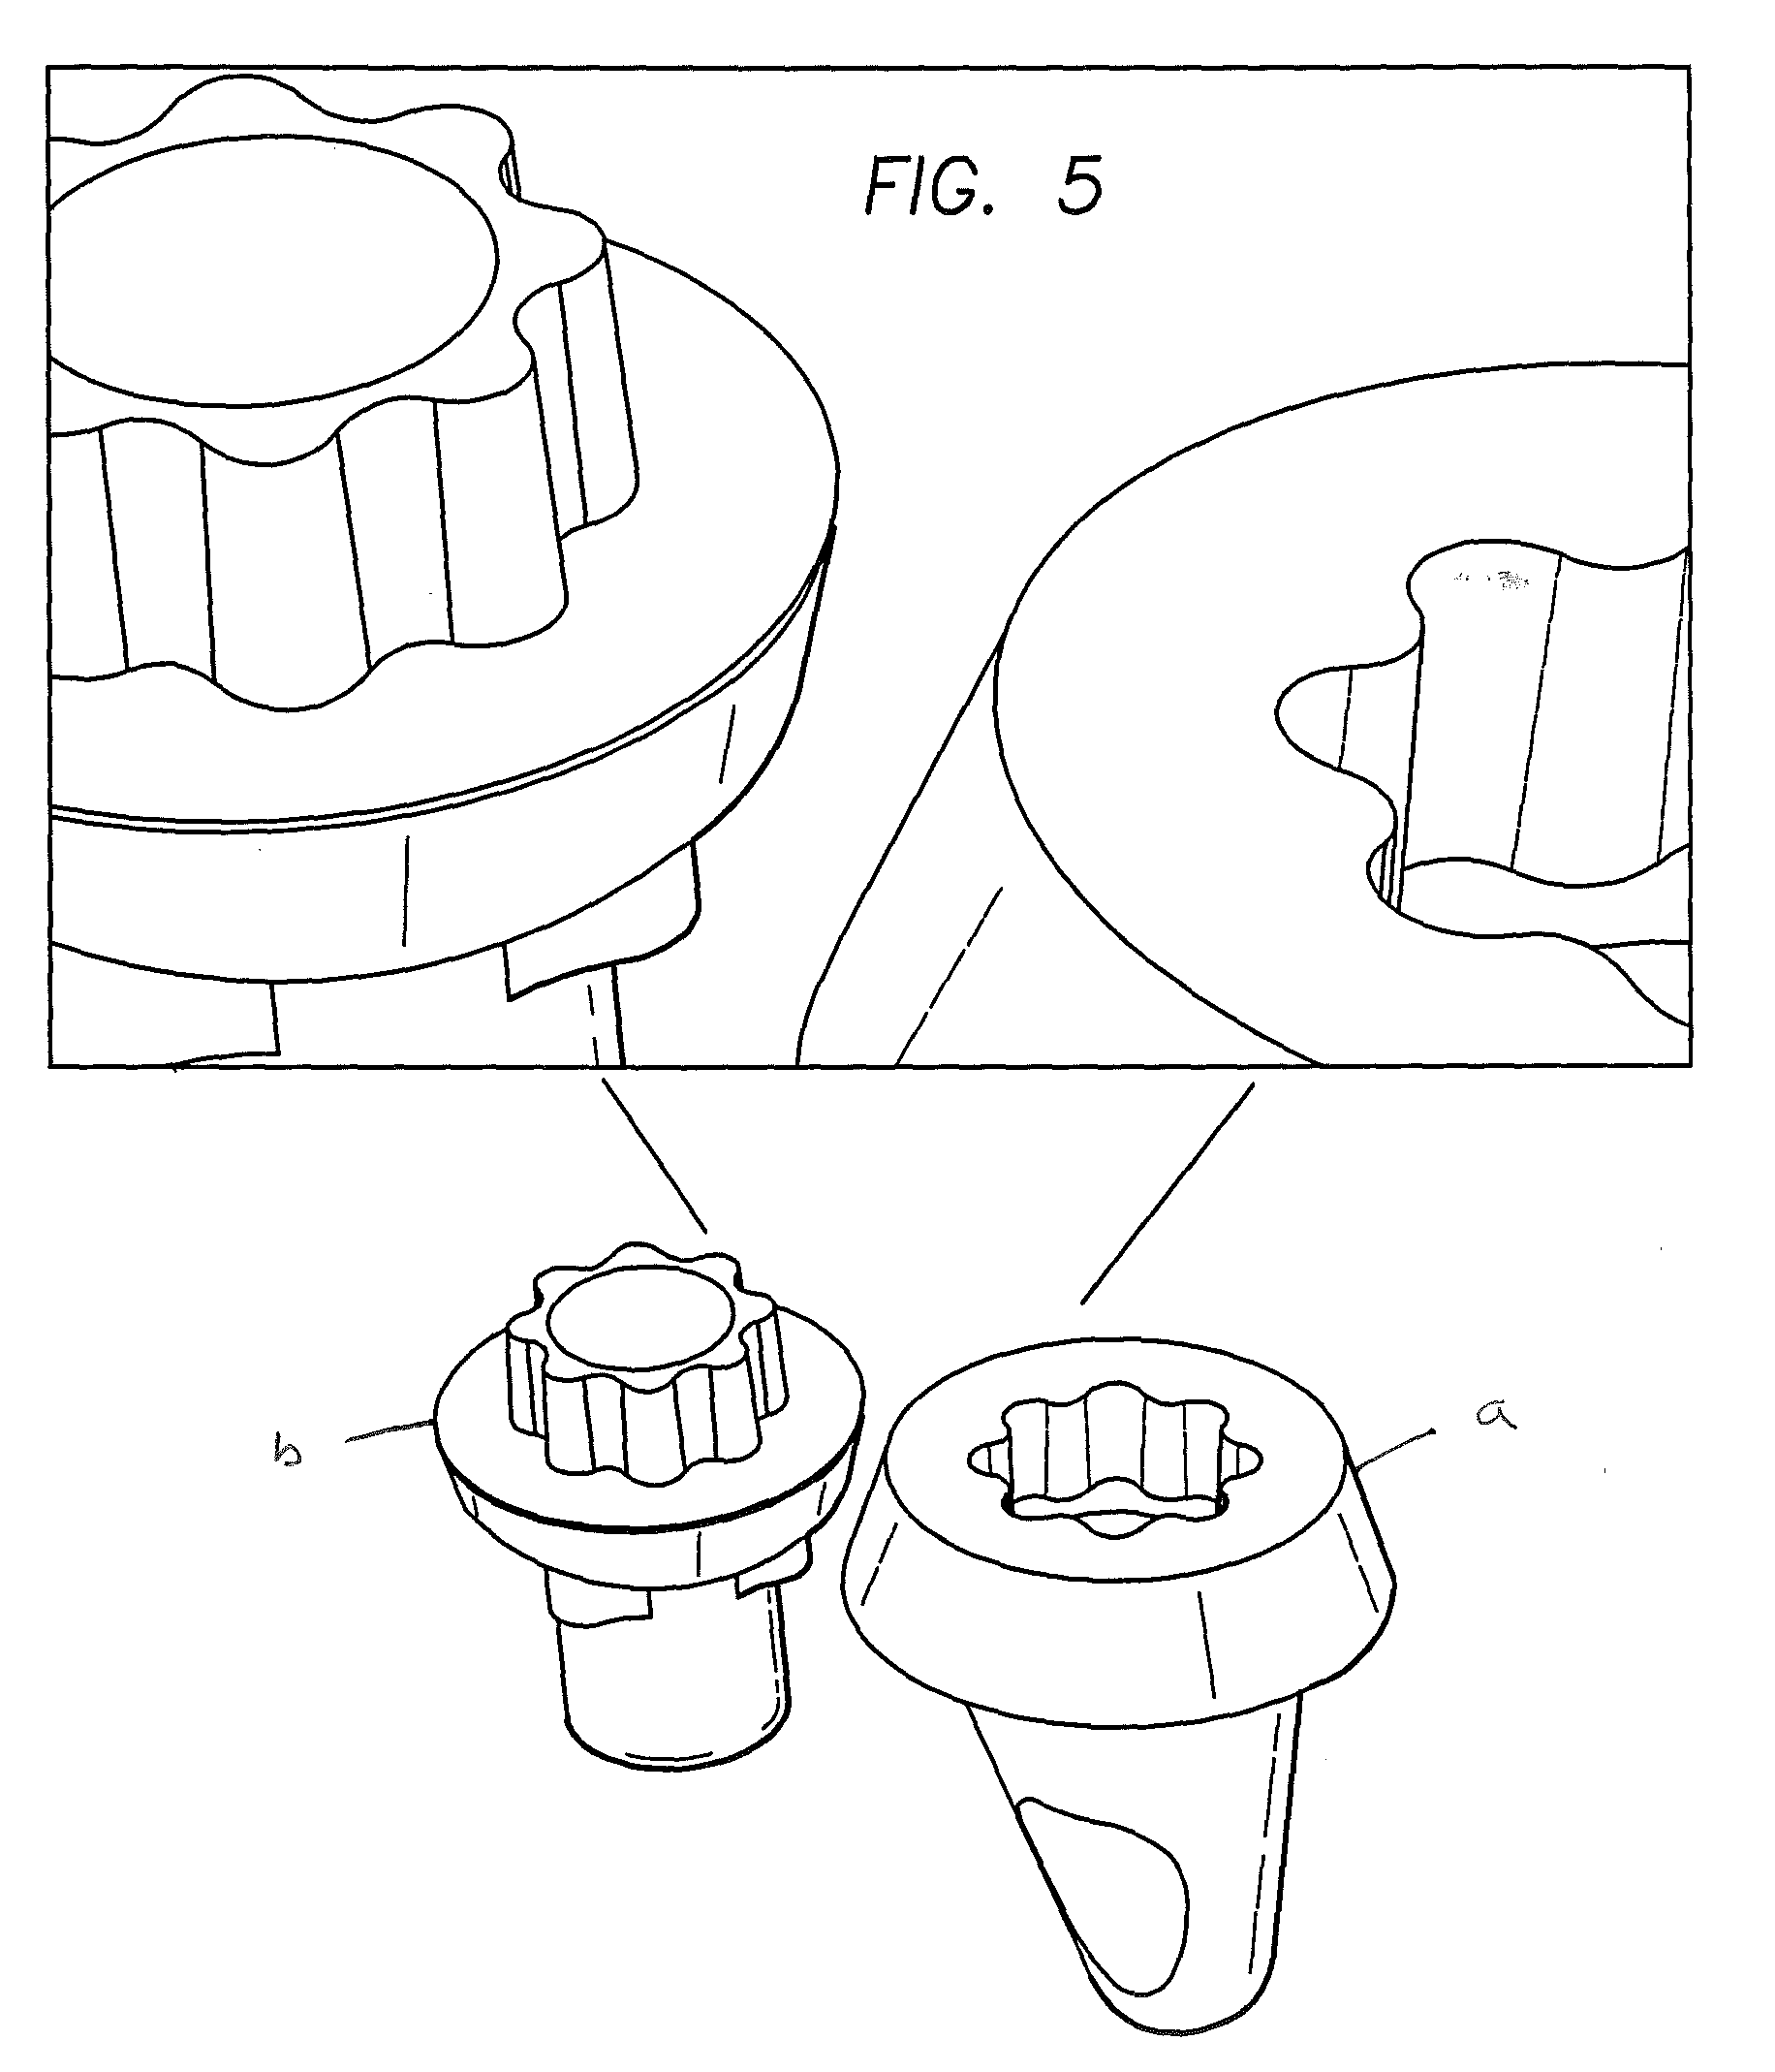 Two-part rotational dental implant abutment for use with existing implant bases